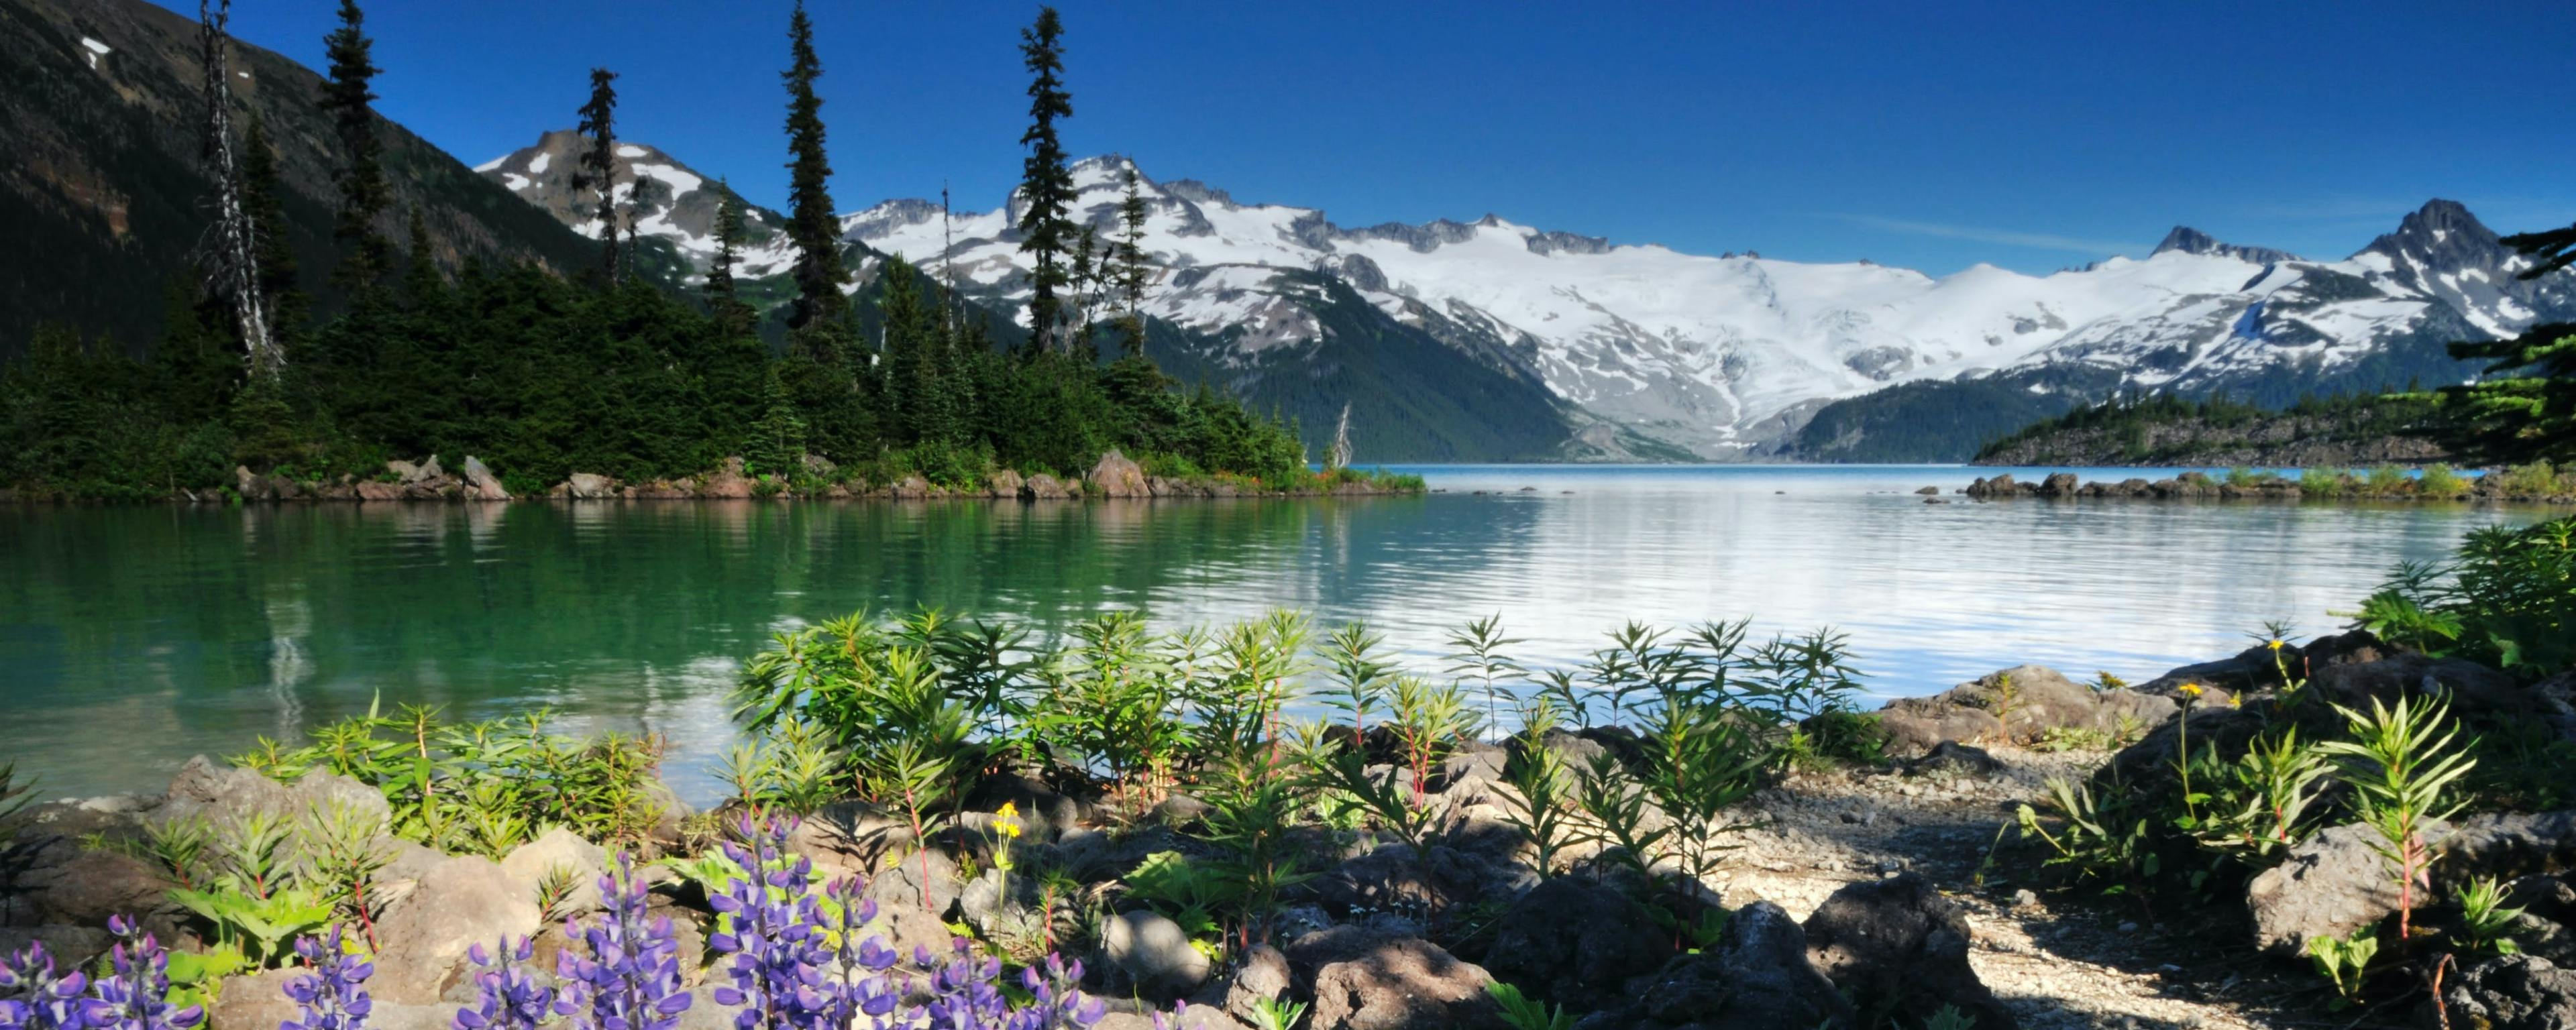 6 Vancouver hikes that you can hit up without a car